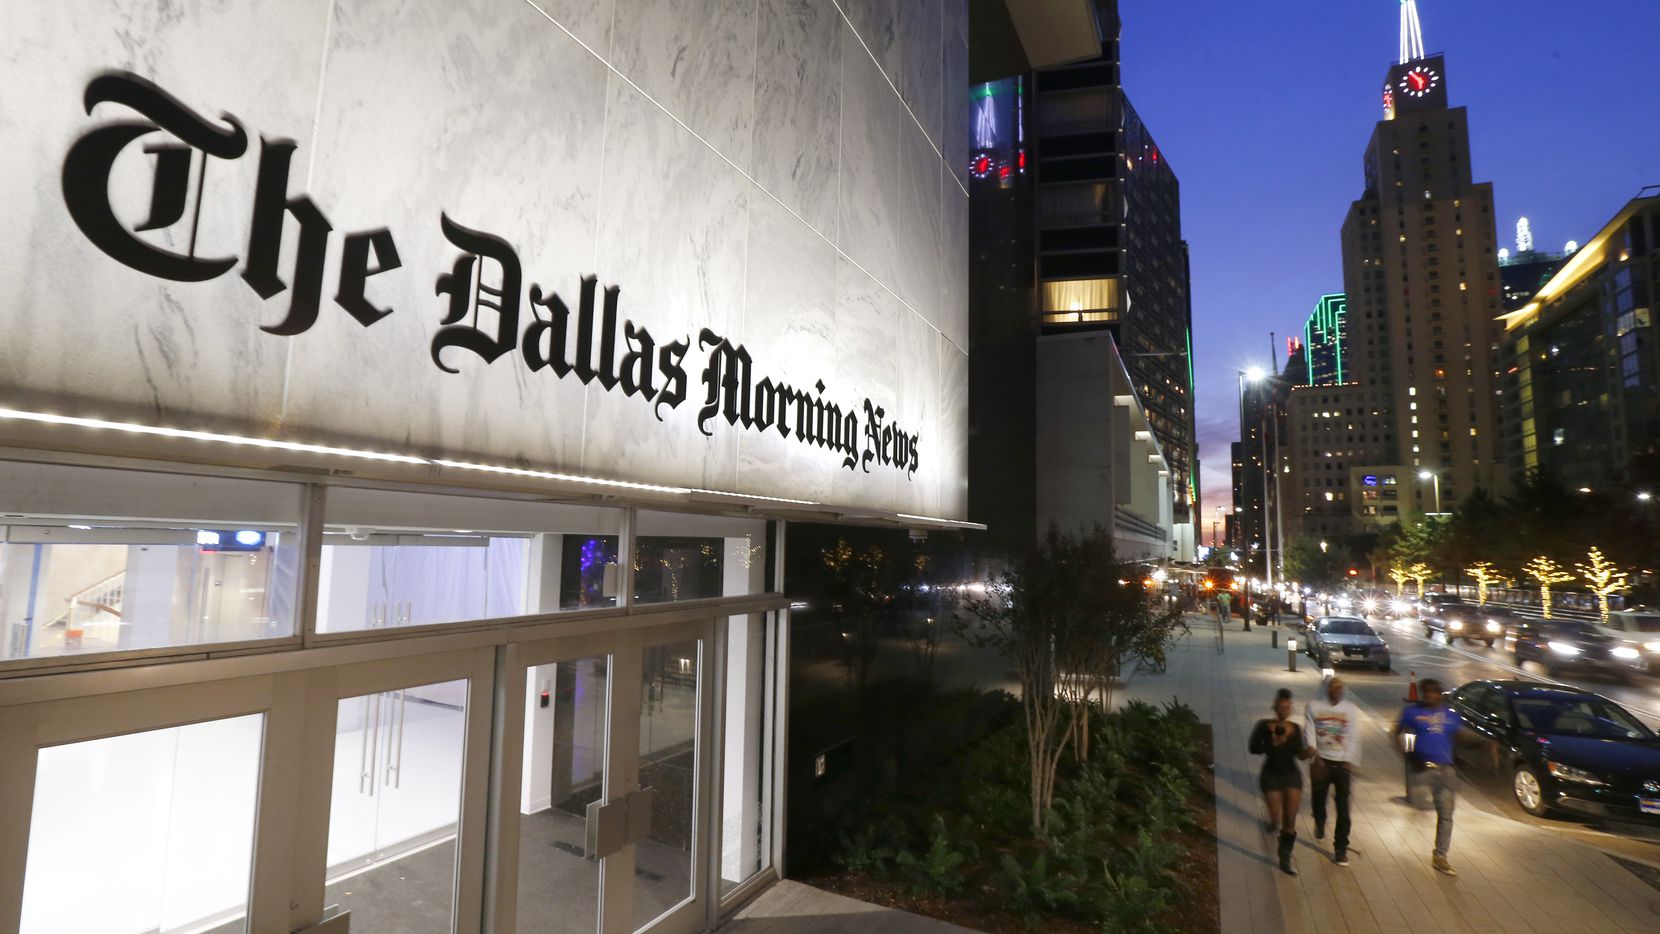 The exterior of the Dallas Morning News building on Commerce Street in downtown Dallas.